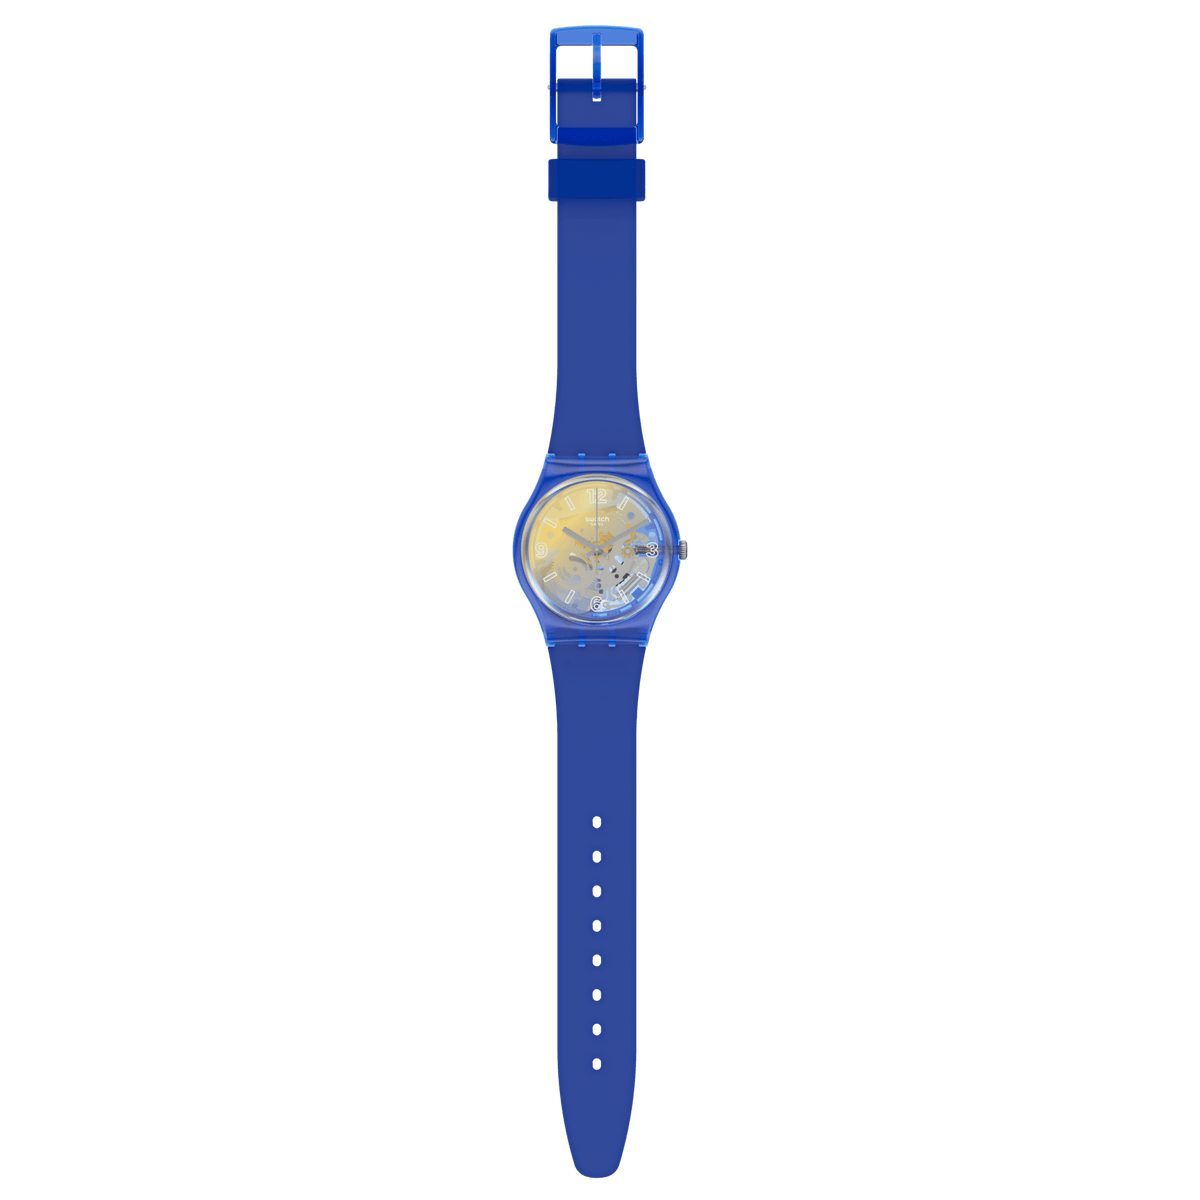 Swatch Watch 34mm - Yellow Disco Fever